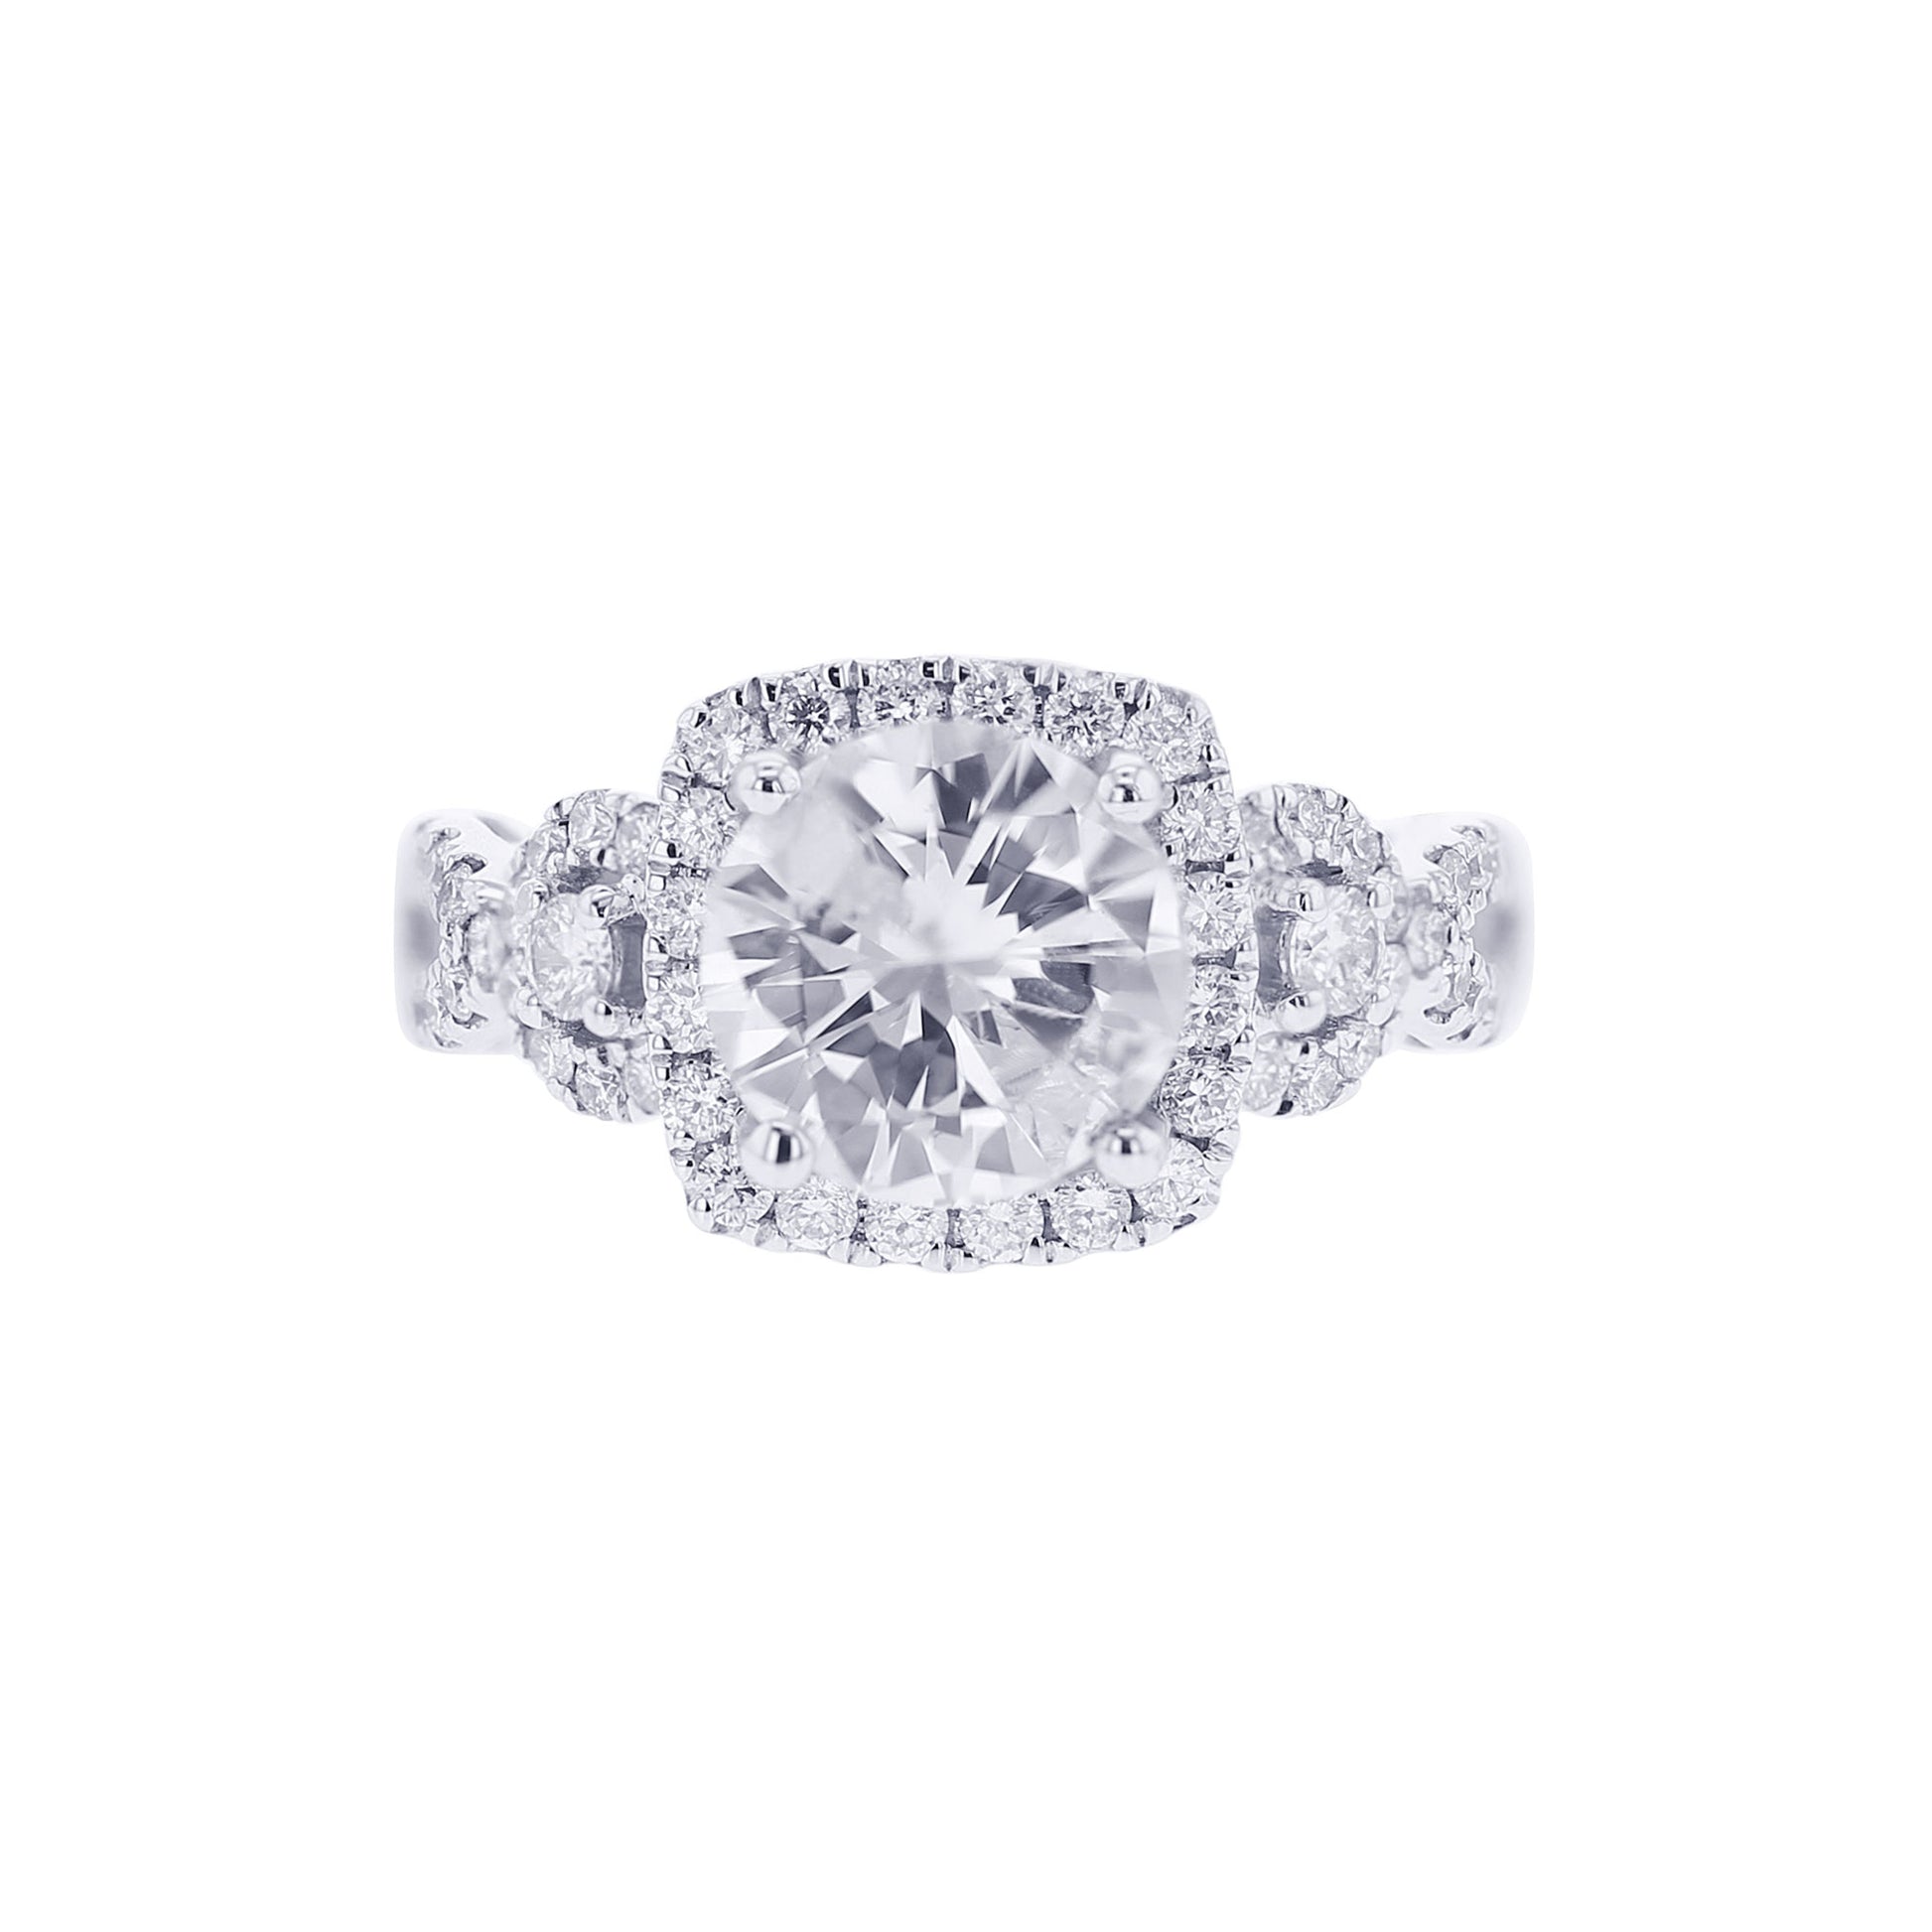 Serafina Ready for Love Engagement Ring 2 7/8ct